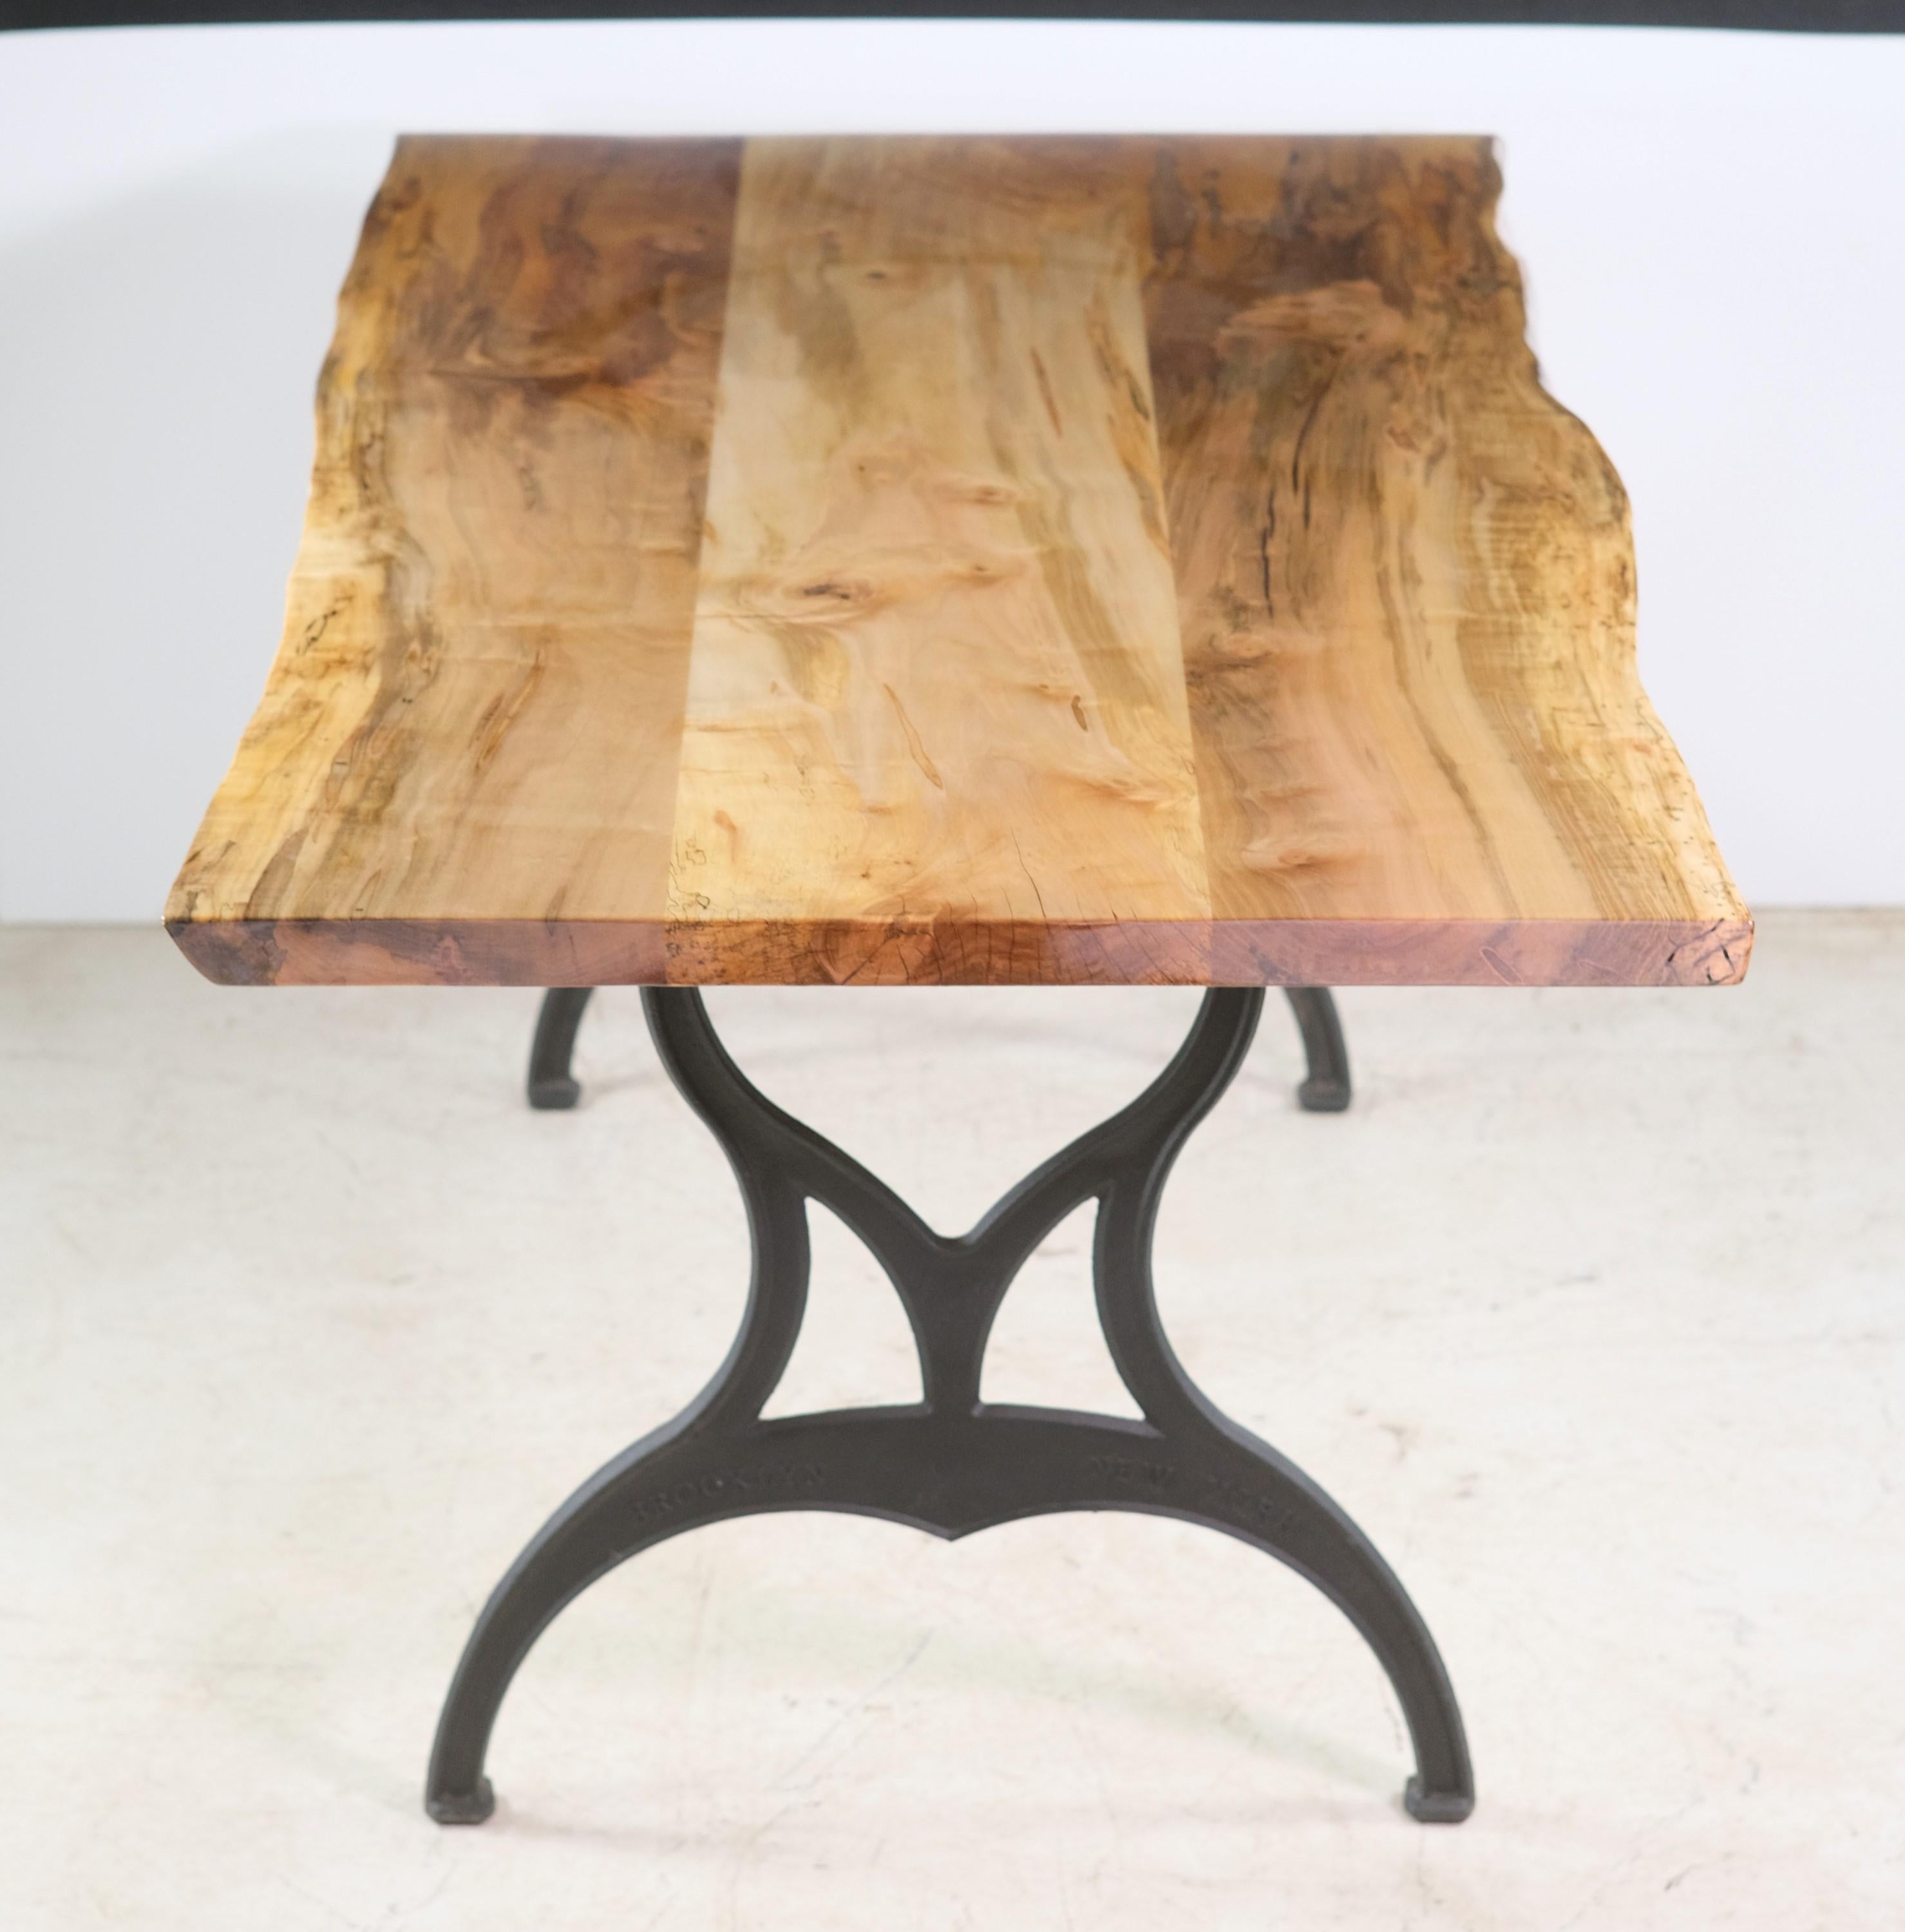 One-of-a-kind dining table made with a one-piece slab of live edge maple paired with black industrial cast iron Brooklyn machine legs. There is some finish hazing on the ends. This table is ready to ship. This can be seen at our 333 West 52nd St